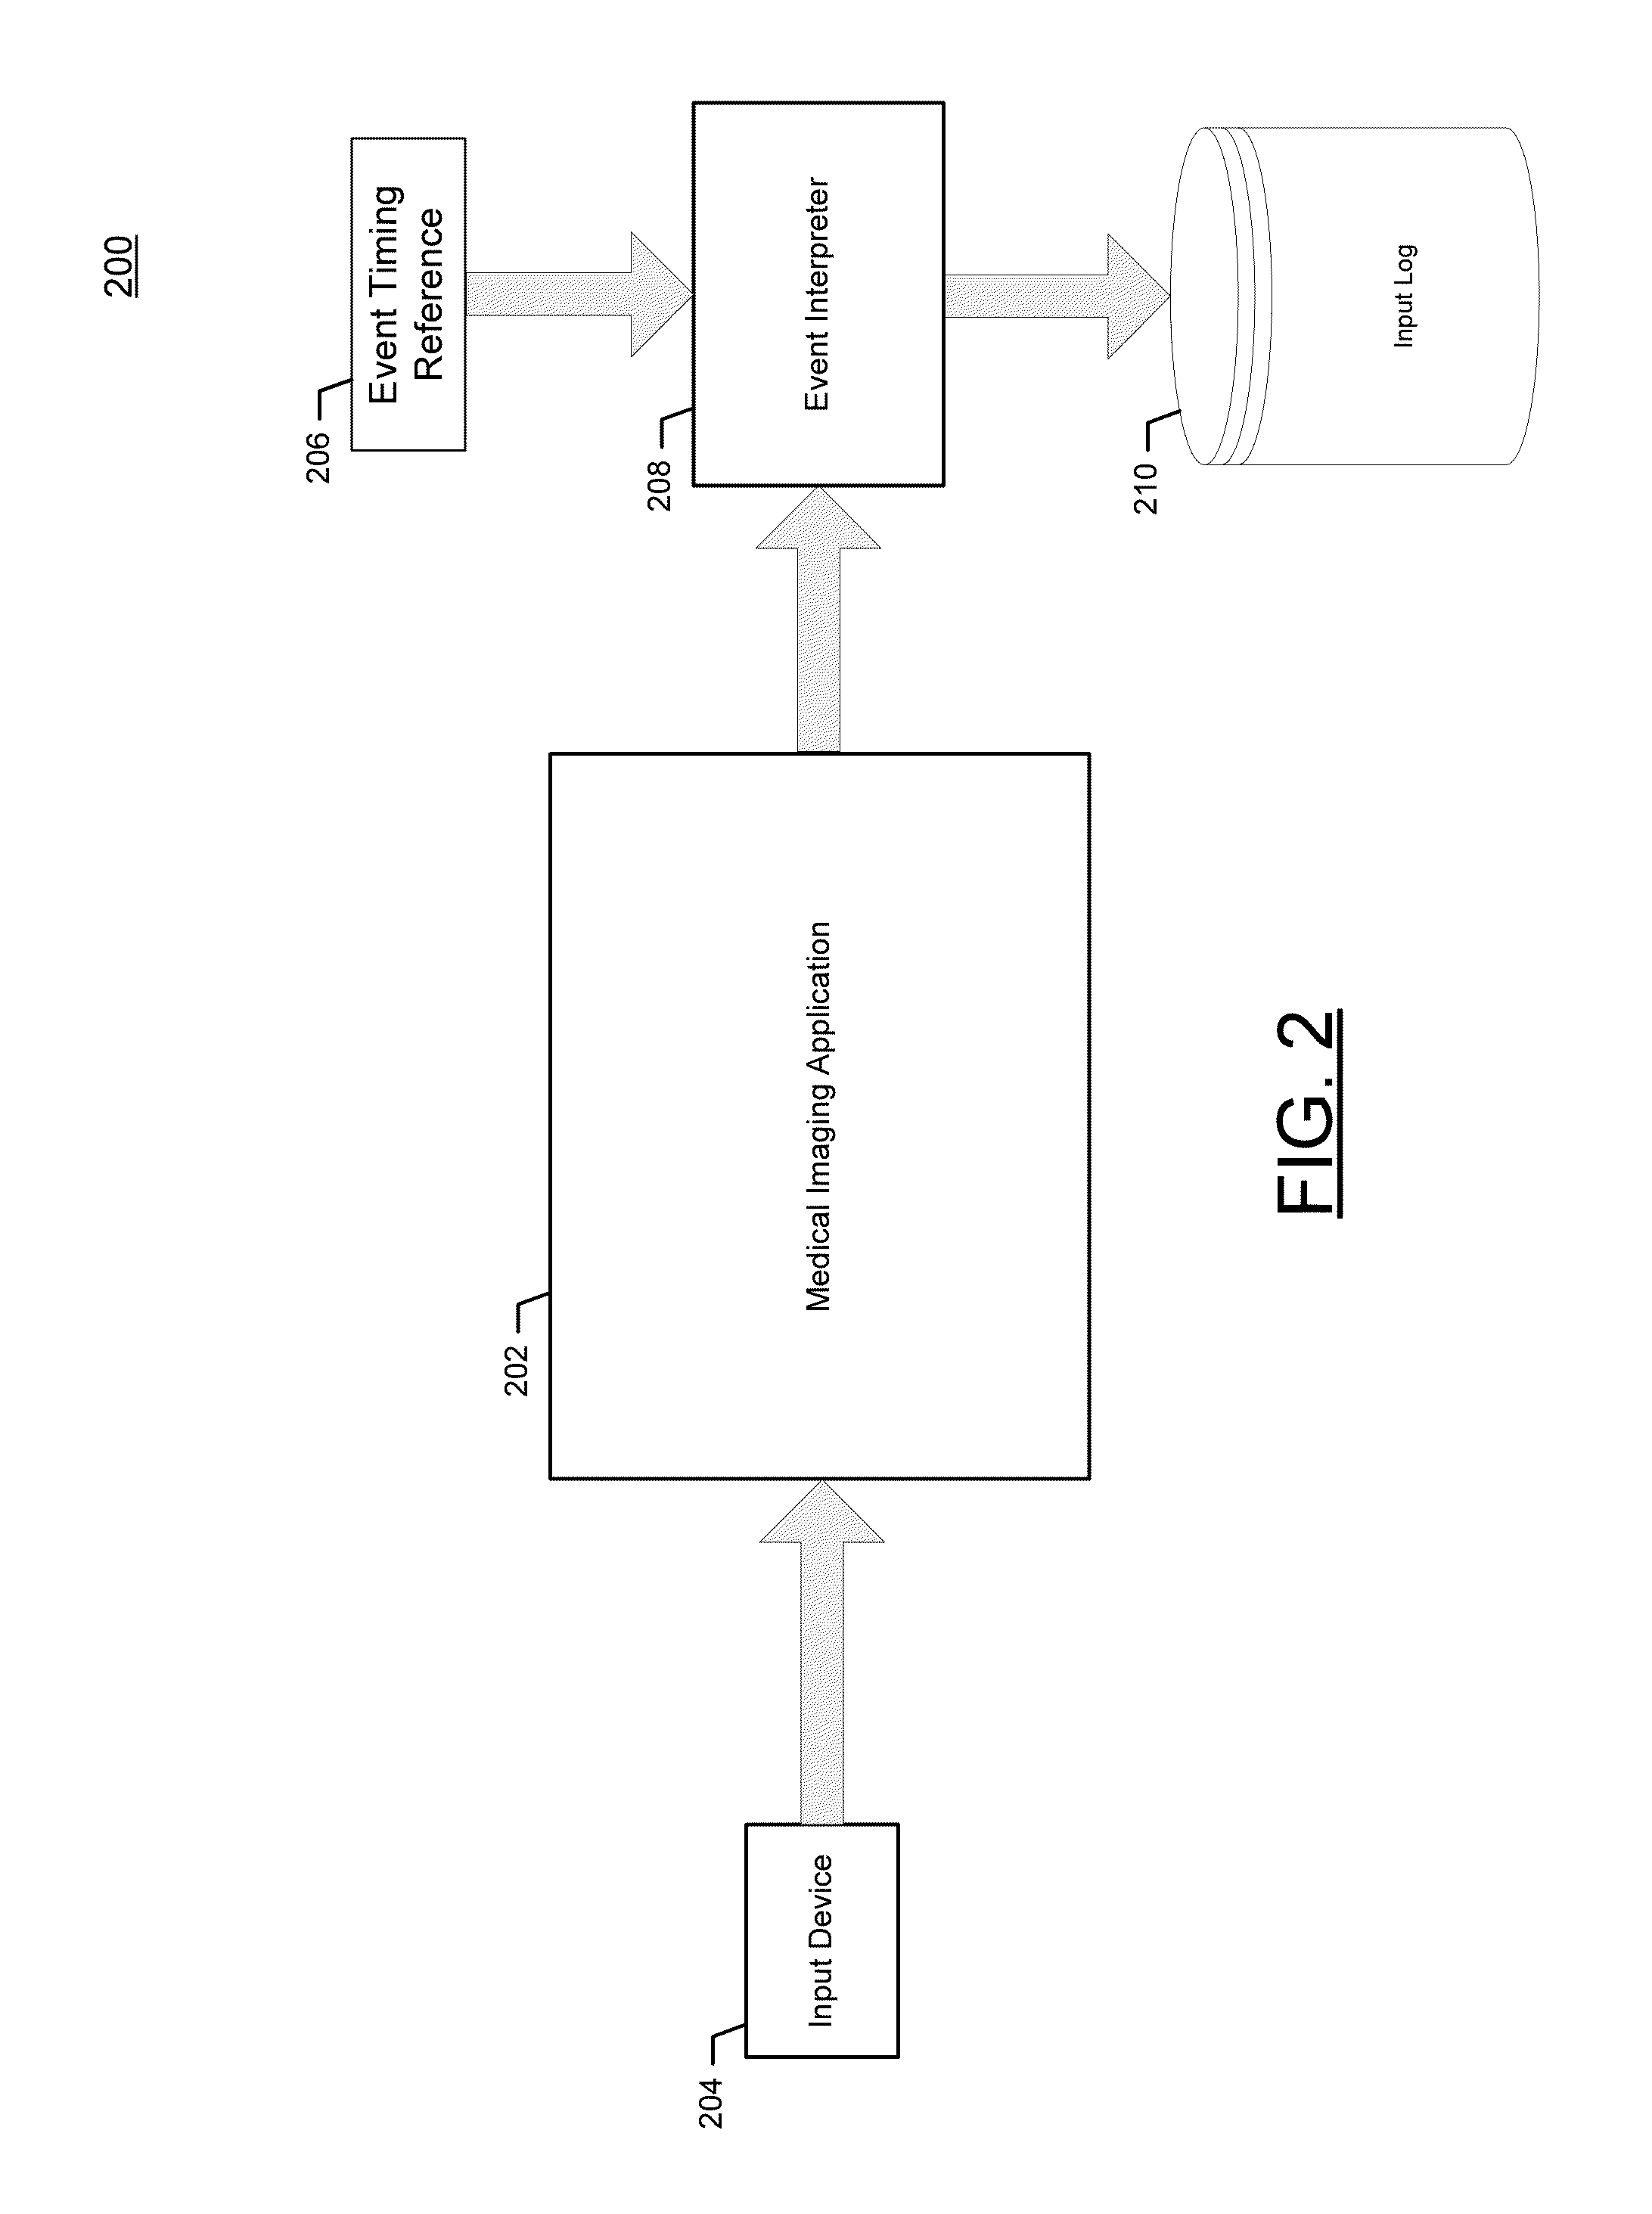 Method and apparatus for providing context aware logging